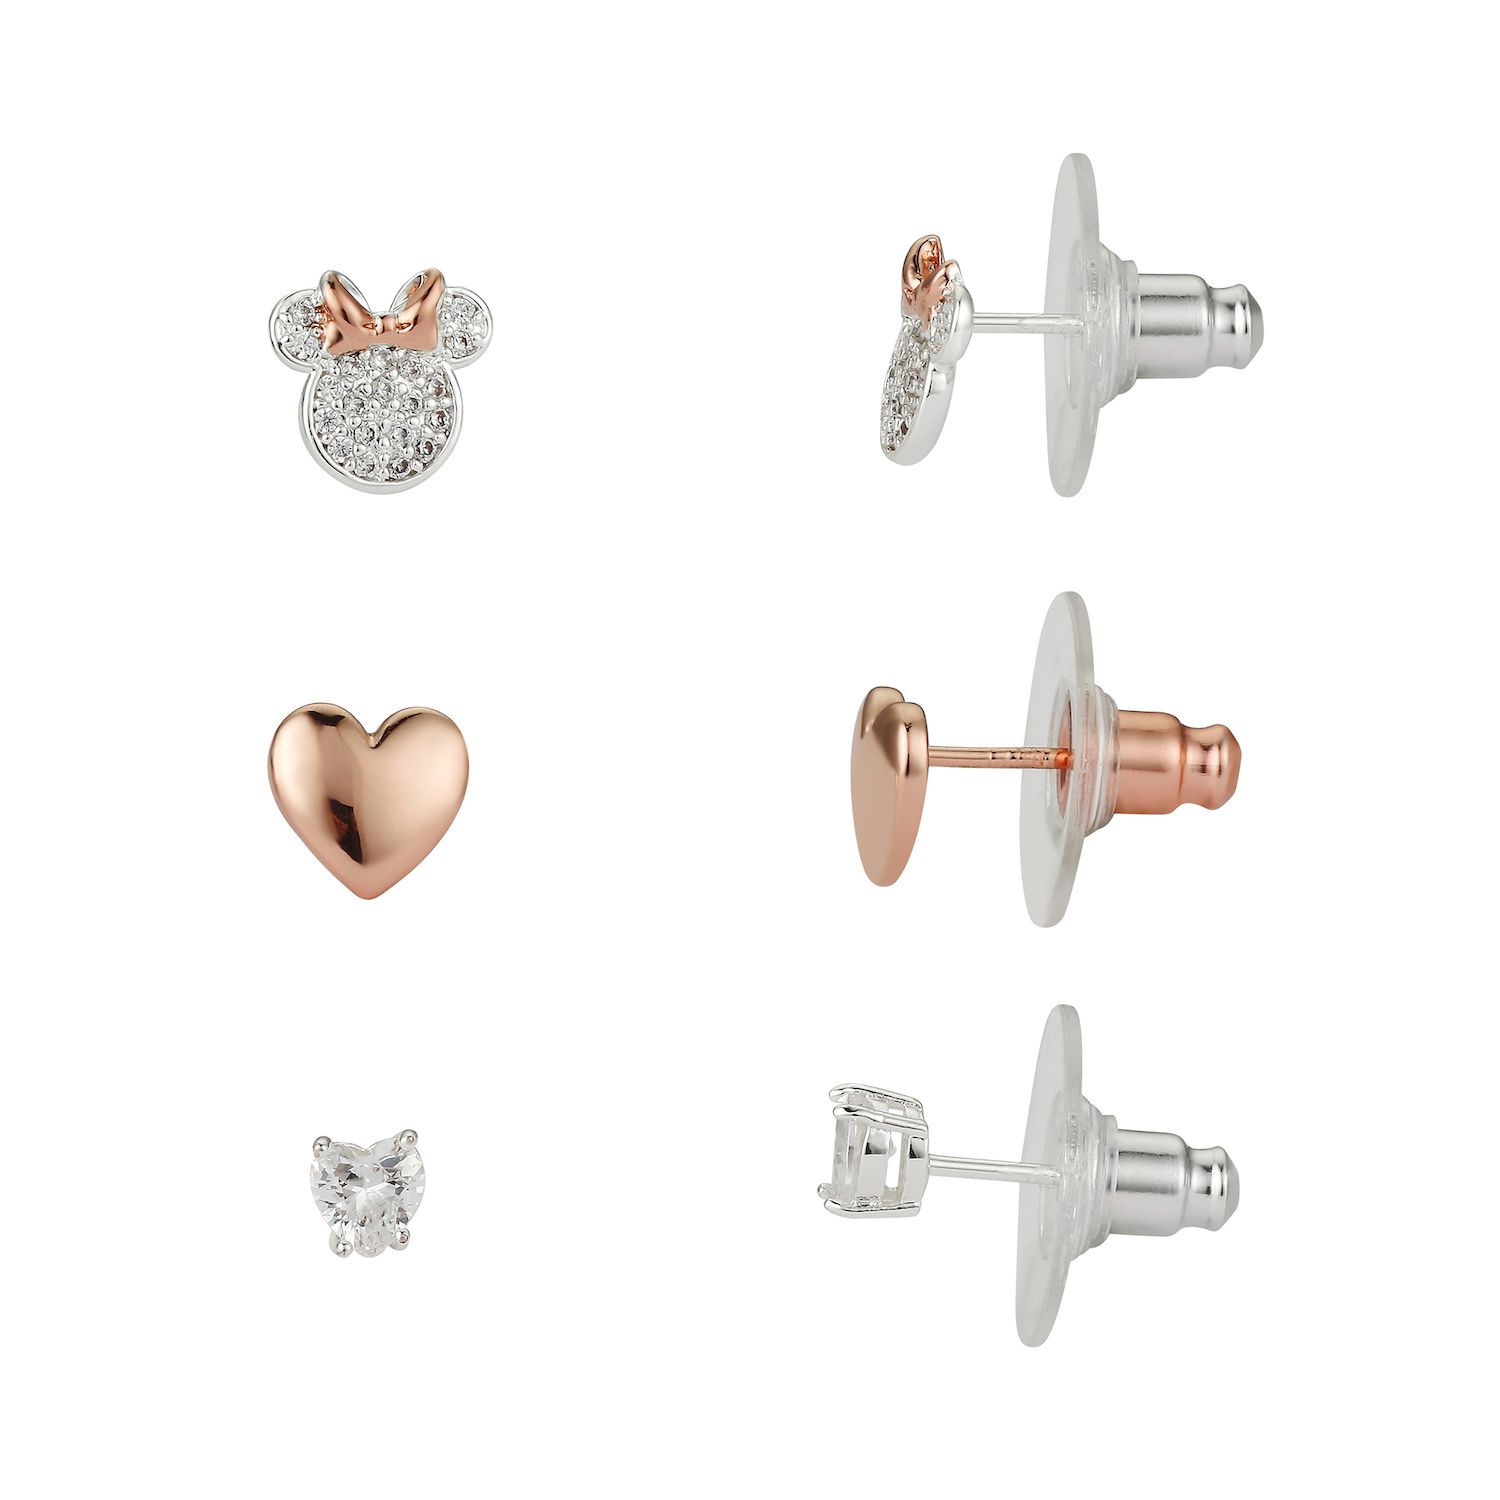 Image for Disney 's Minnie Mouse Two Tone Cubic Zirconia Heart Nickel Free Earring Set at Kohl's.